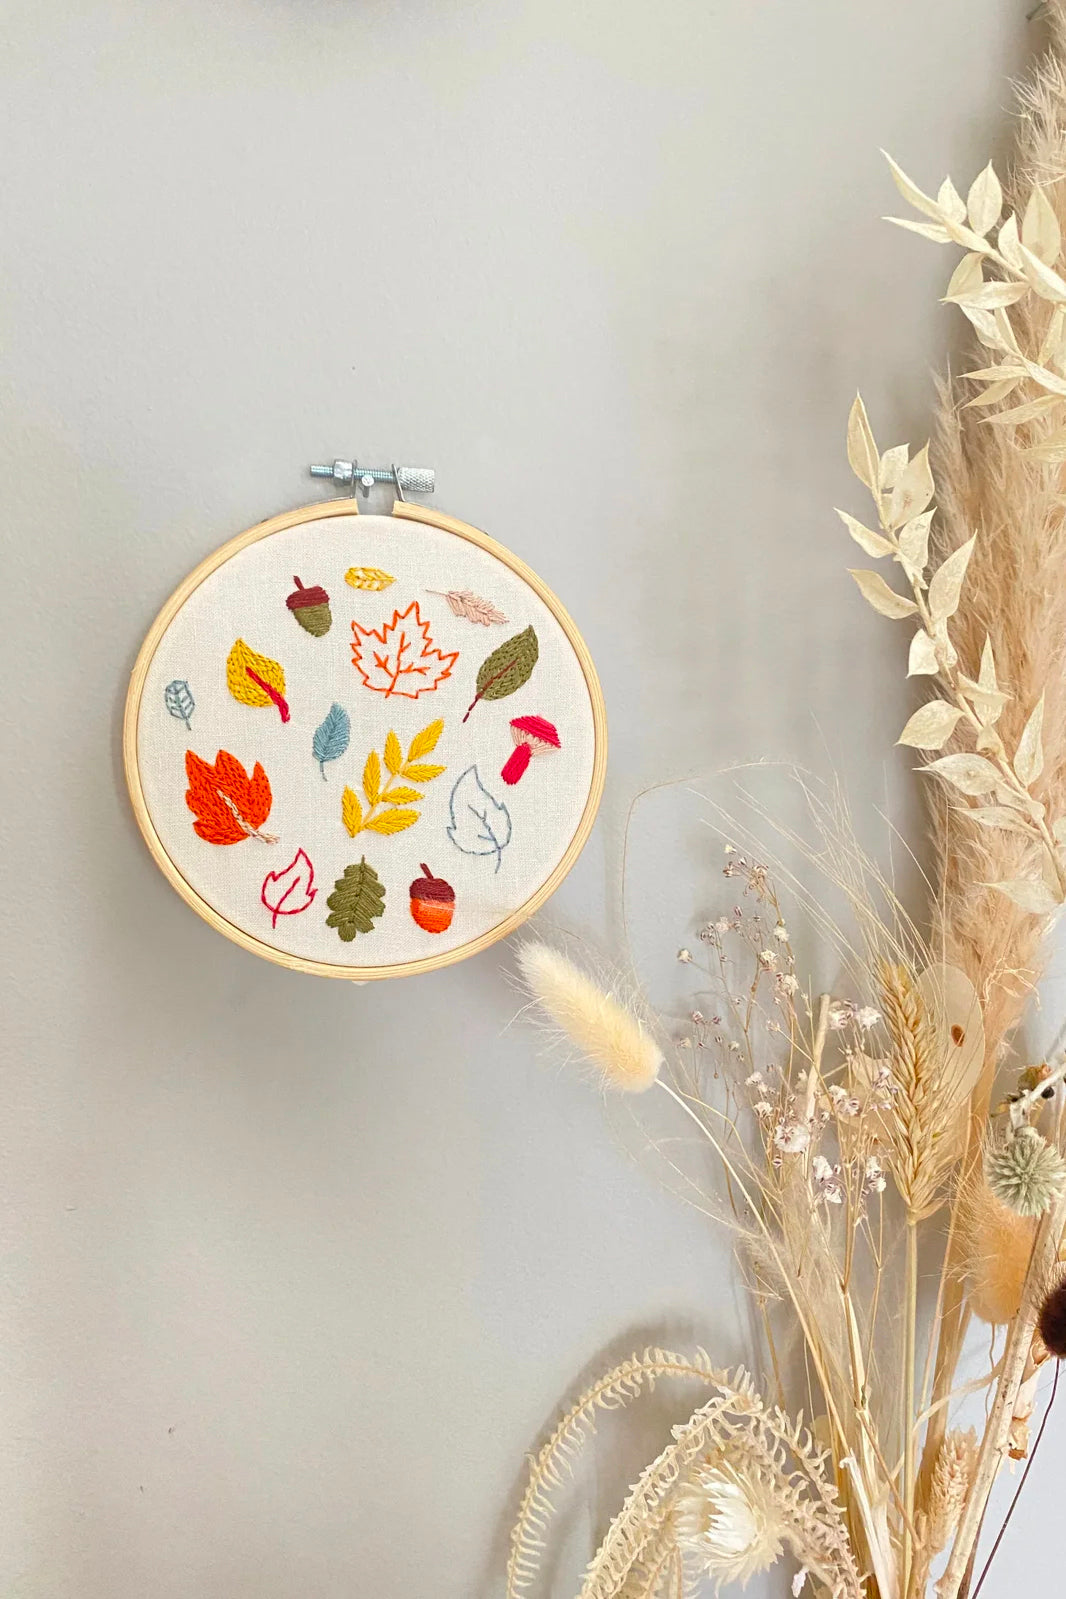 Autumn Leaves Hand Embroidery Kit